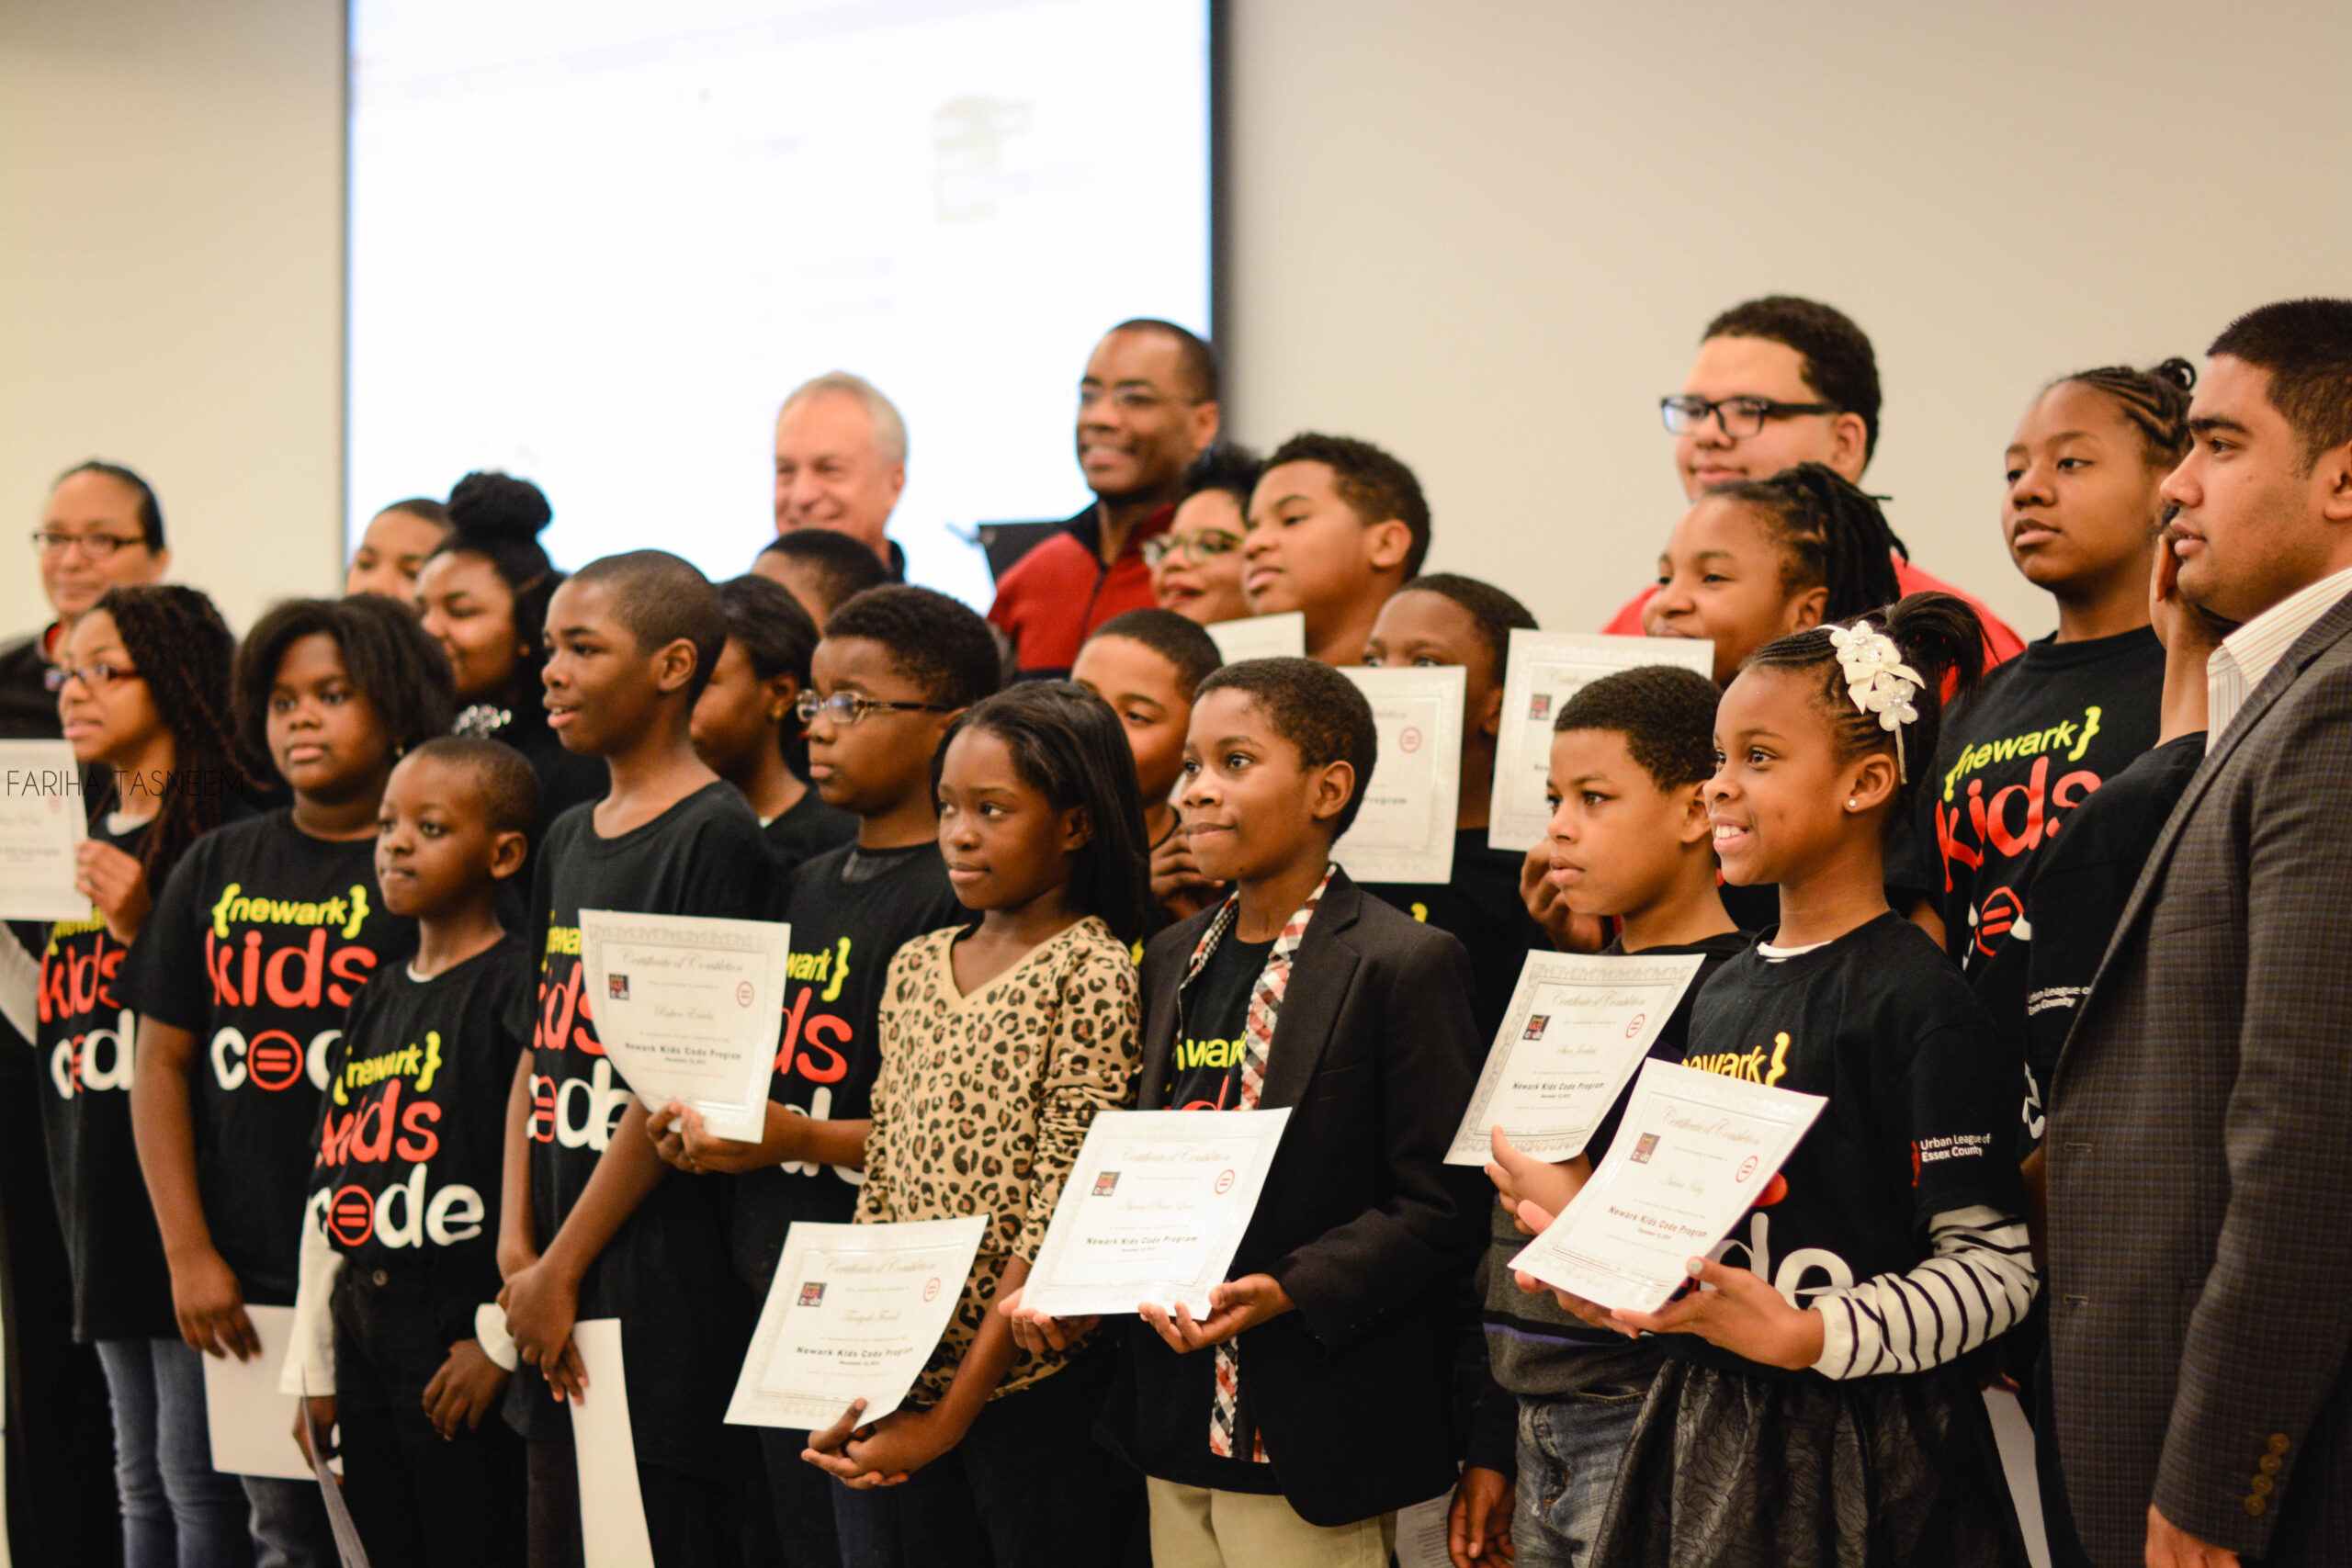 Students receiving completion certificate of the Newark Kids Code Program